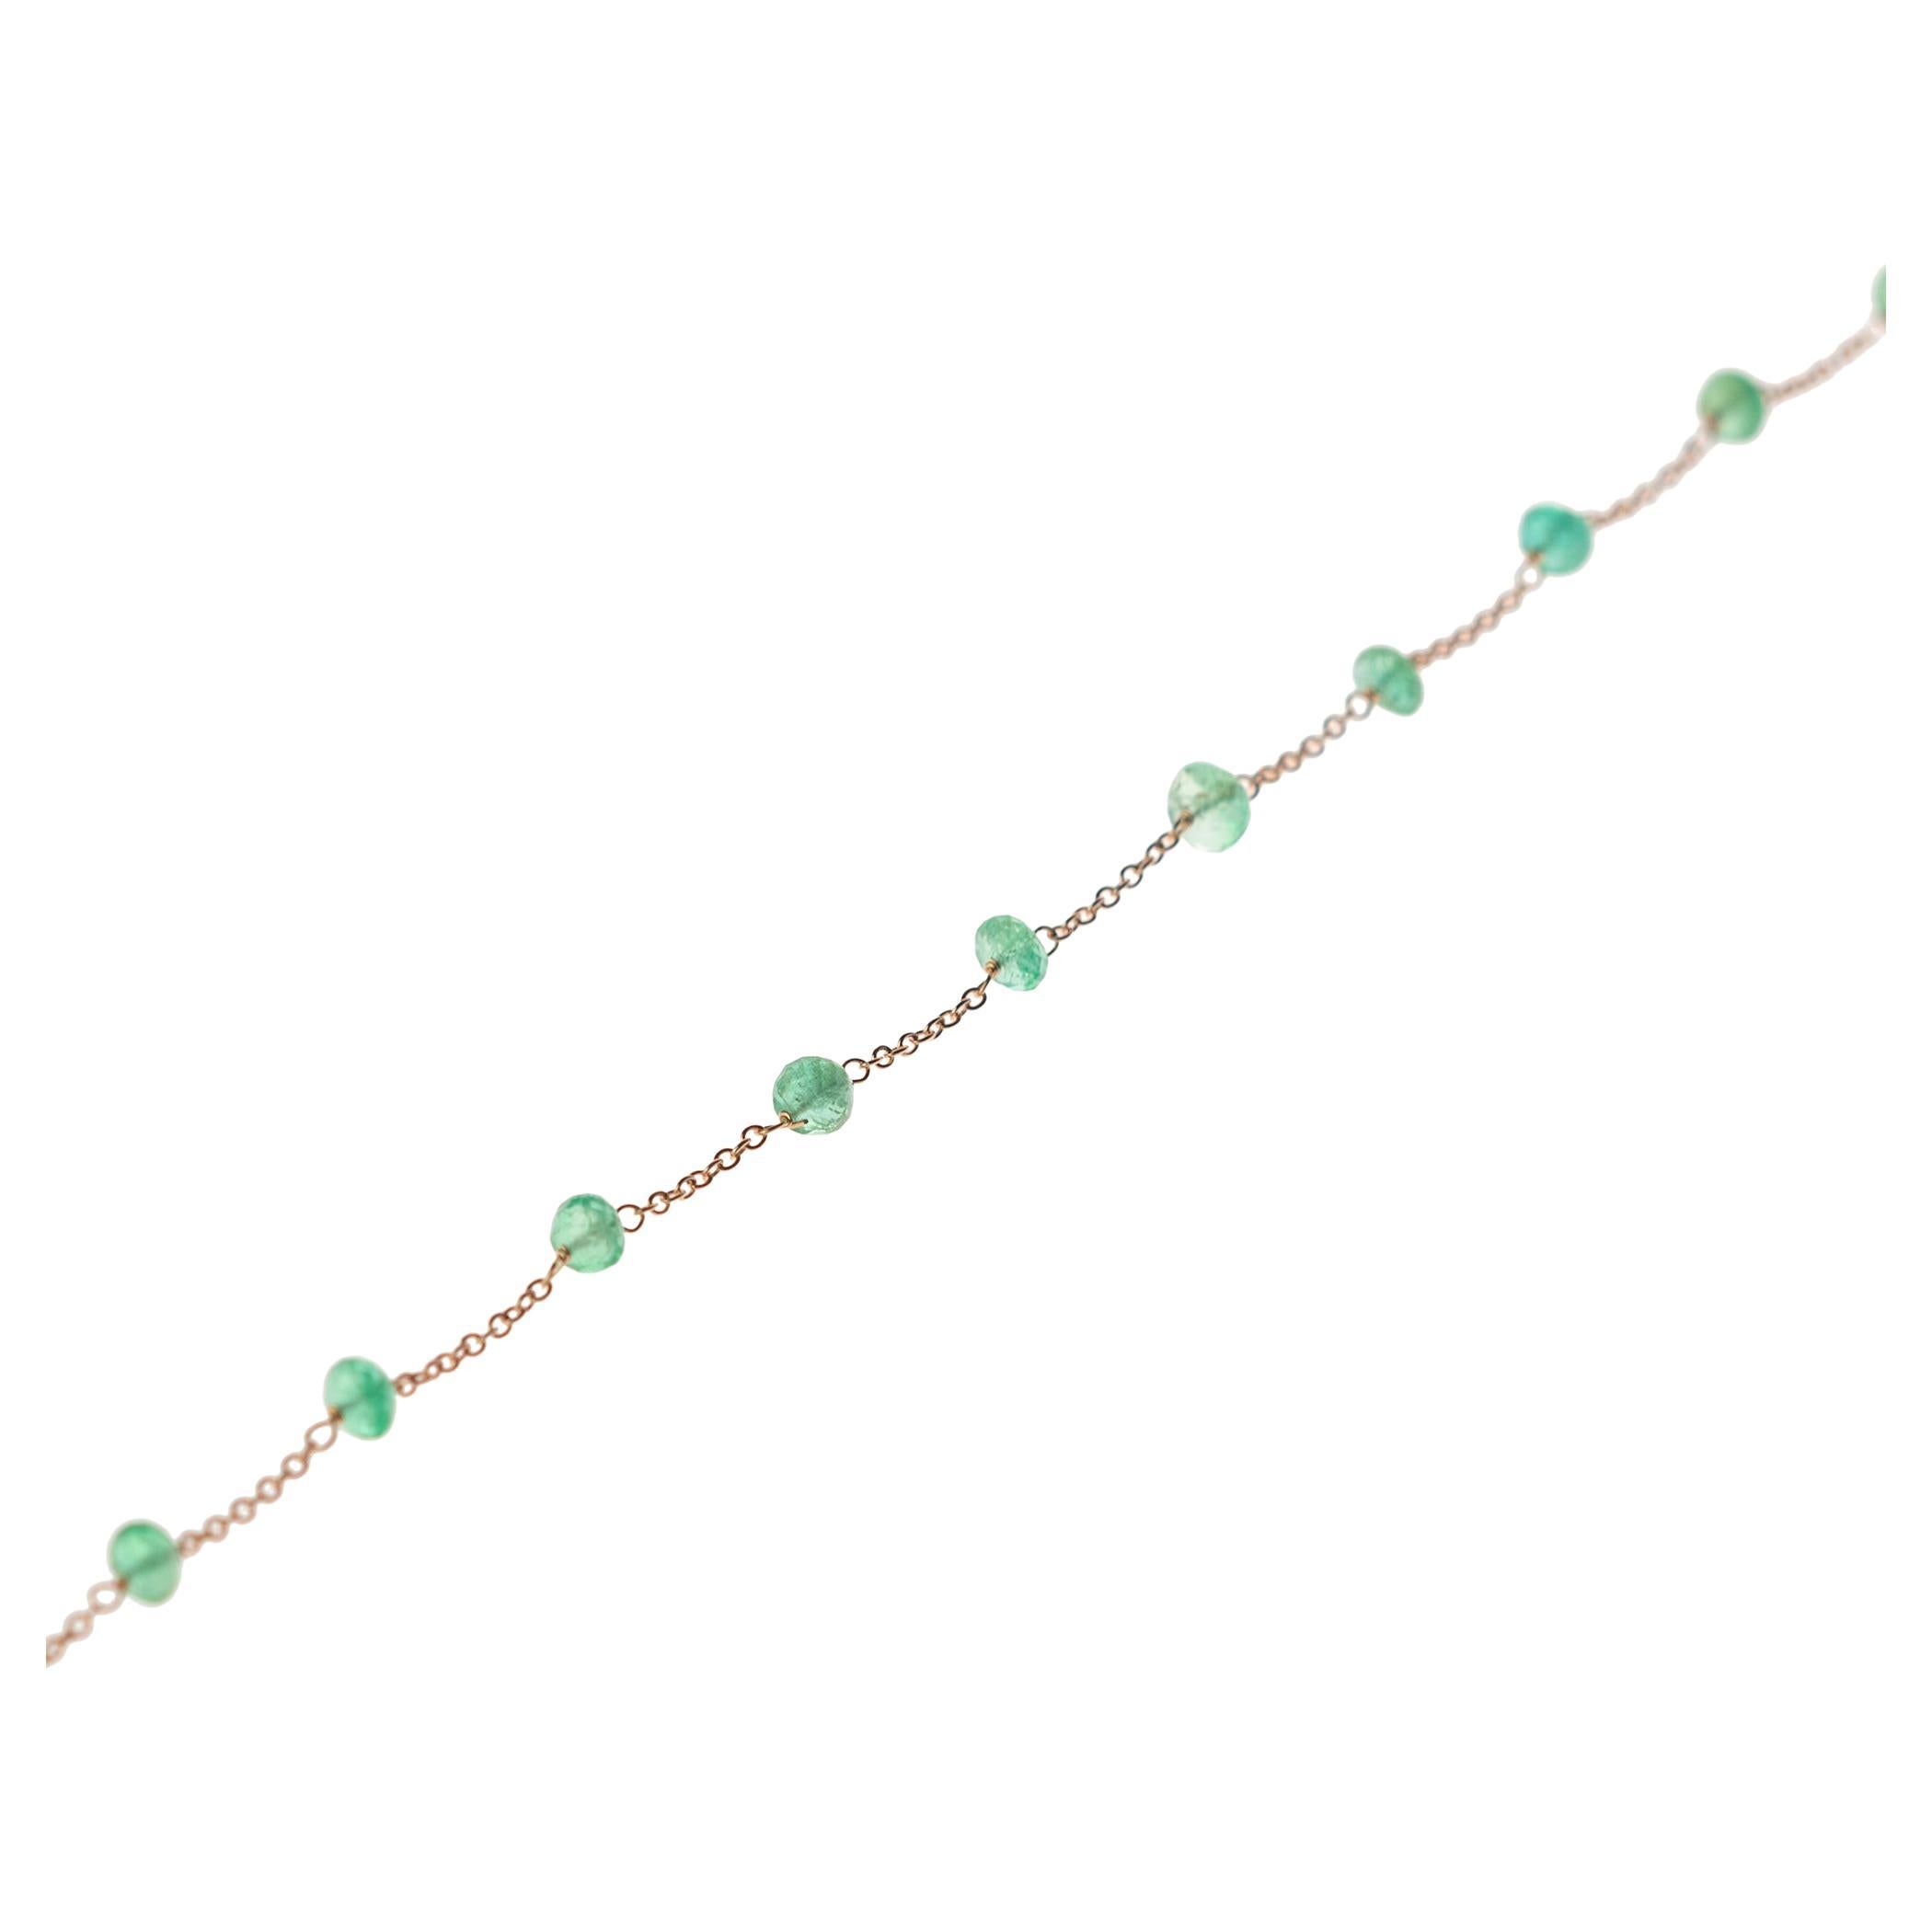 An emerald bracelet full of design. A modern and delicate style for a young and fearless woman. Artisan rondelle cut emeralds immersed in a 14 karat yellow gold chain.

• 14 karat yellow gold 1.1 g
• Total length 19 /20 cm
• Emerald 1.4 carats
•